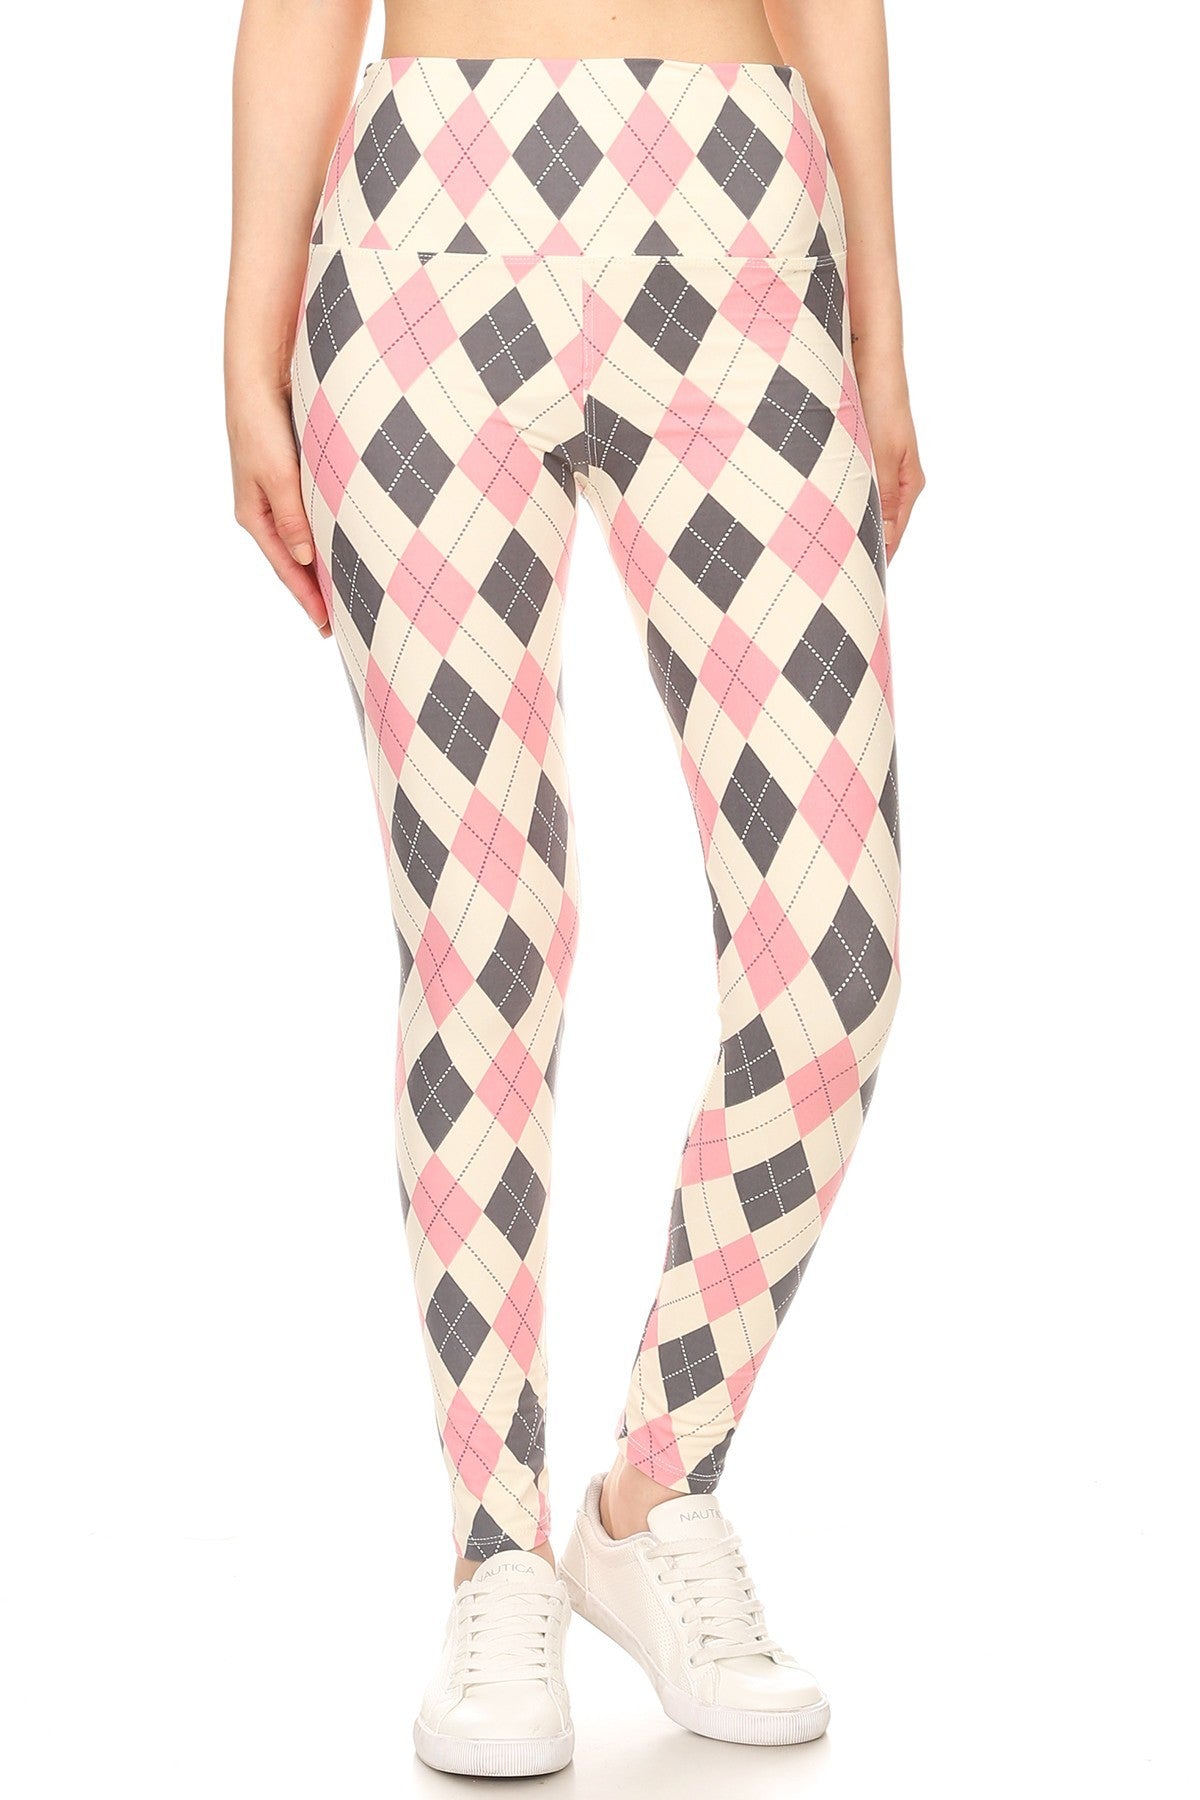 5-inch Long Yoga Style Banded Lined Argyle Printed Knit Legging With High Waist - Beauty by Lady Finch